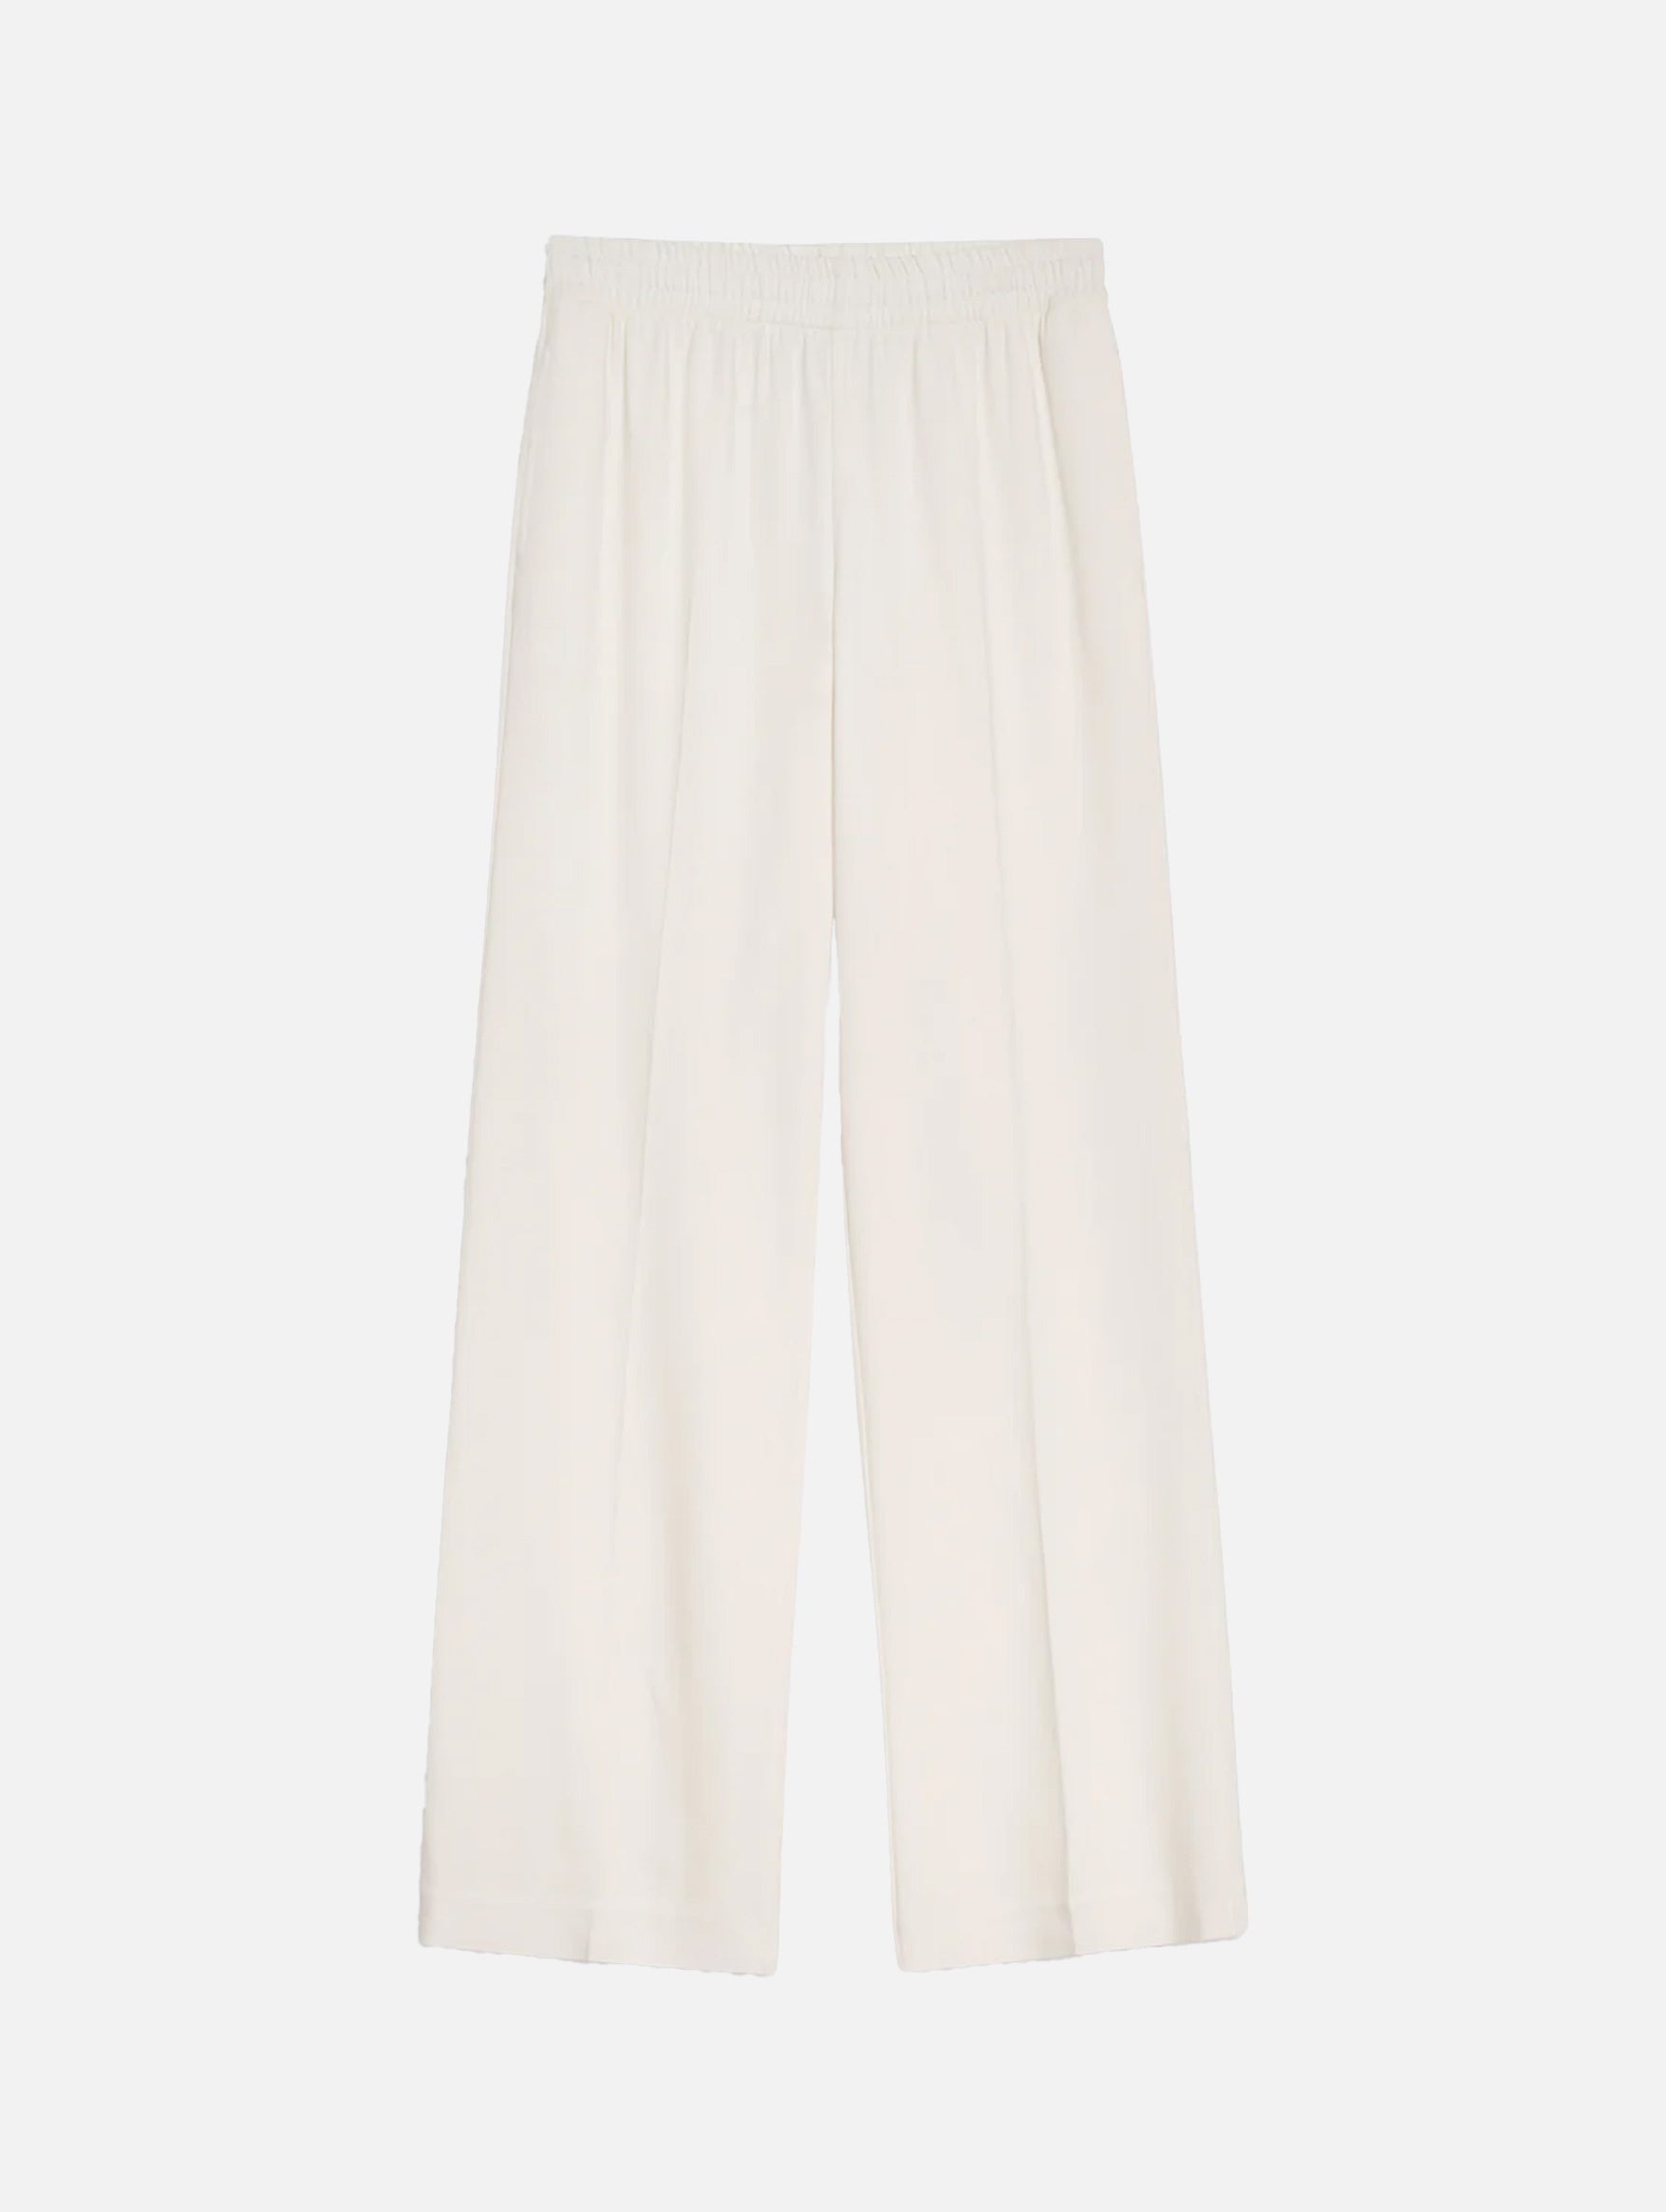 Soto Pant in Ivory